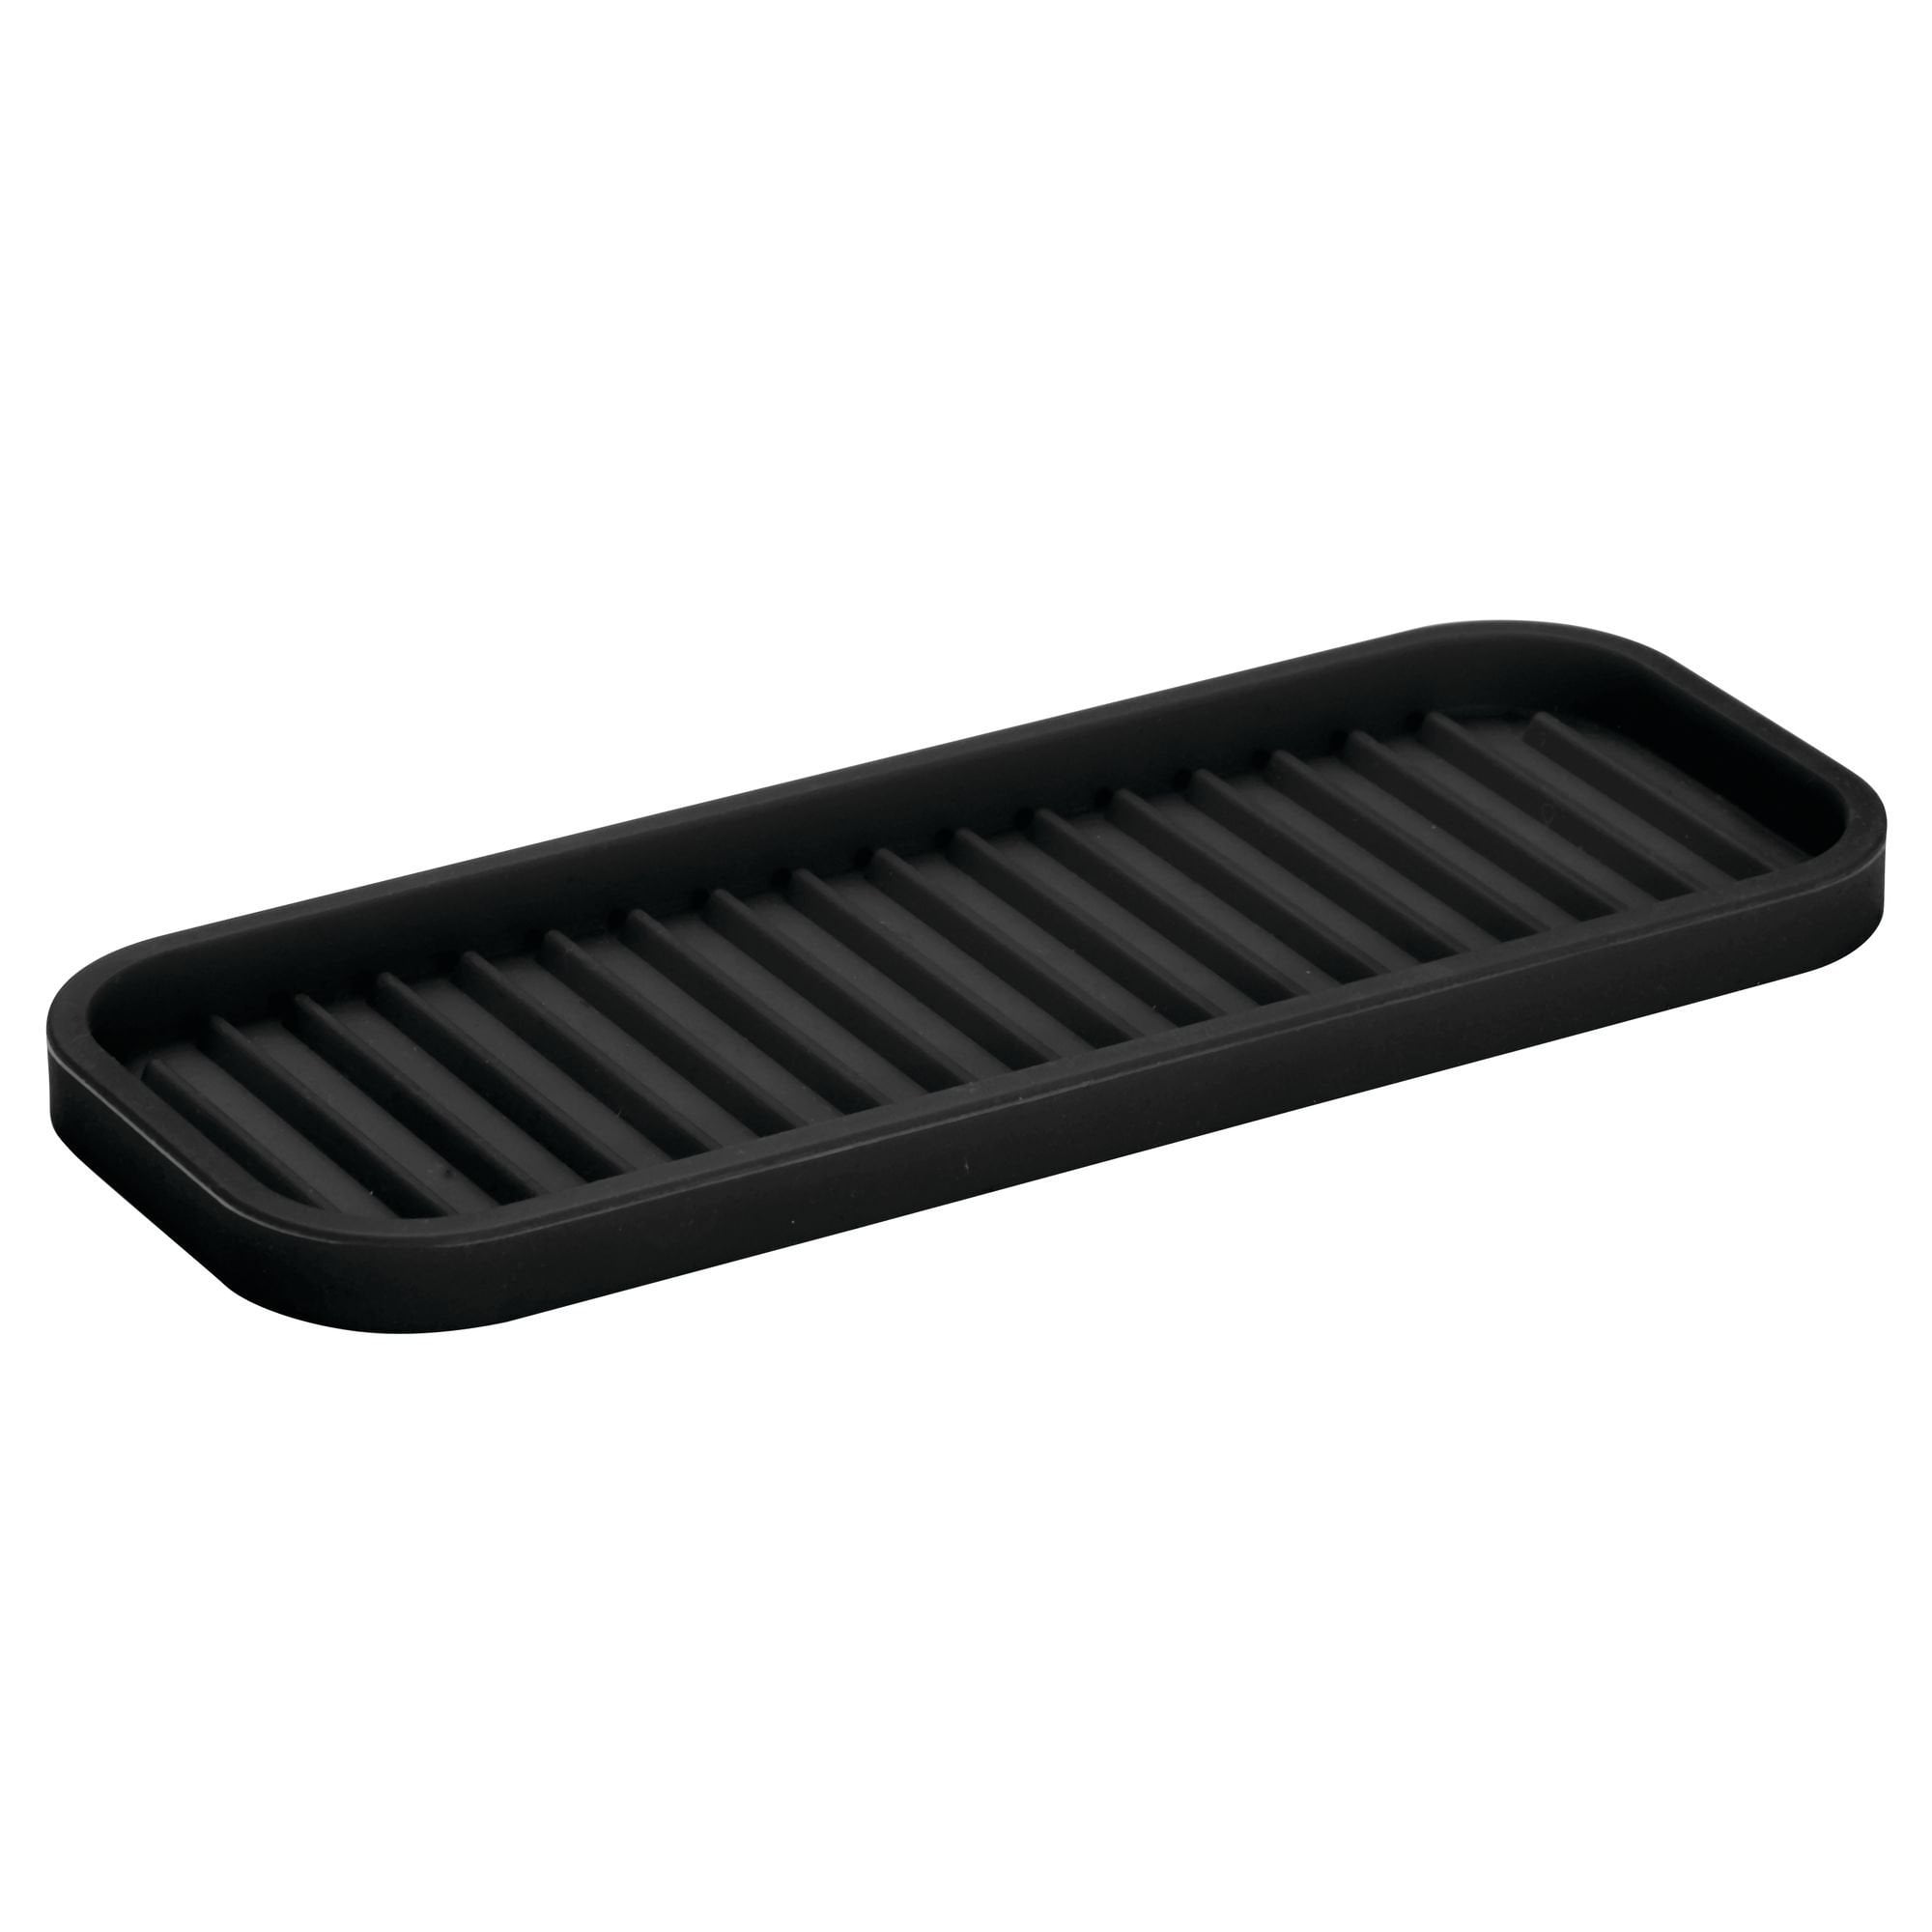 iDesign 63883 Lineo Silicone Kitchen Sink Tray for Sponges